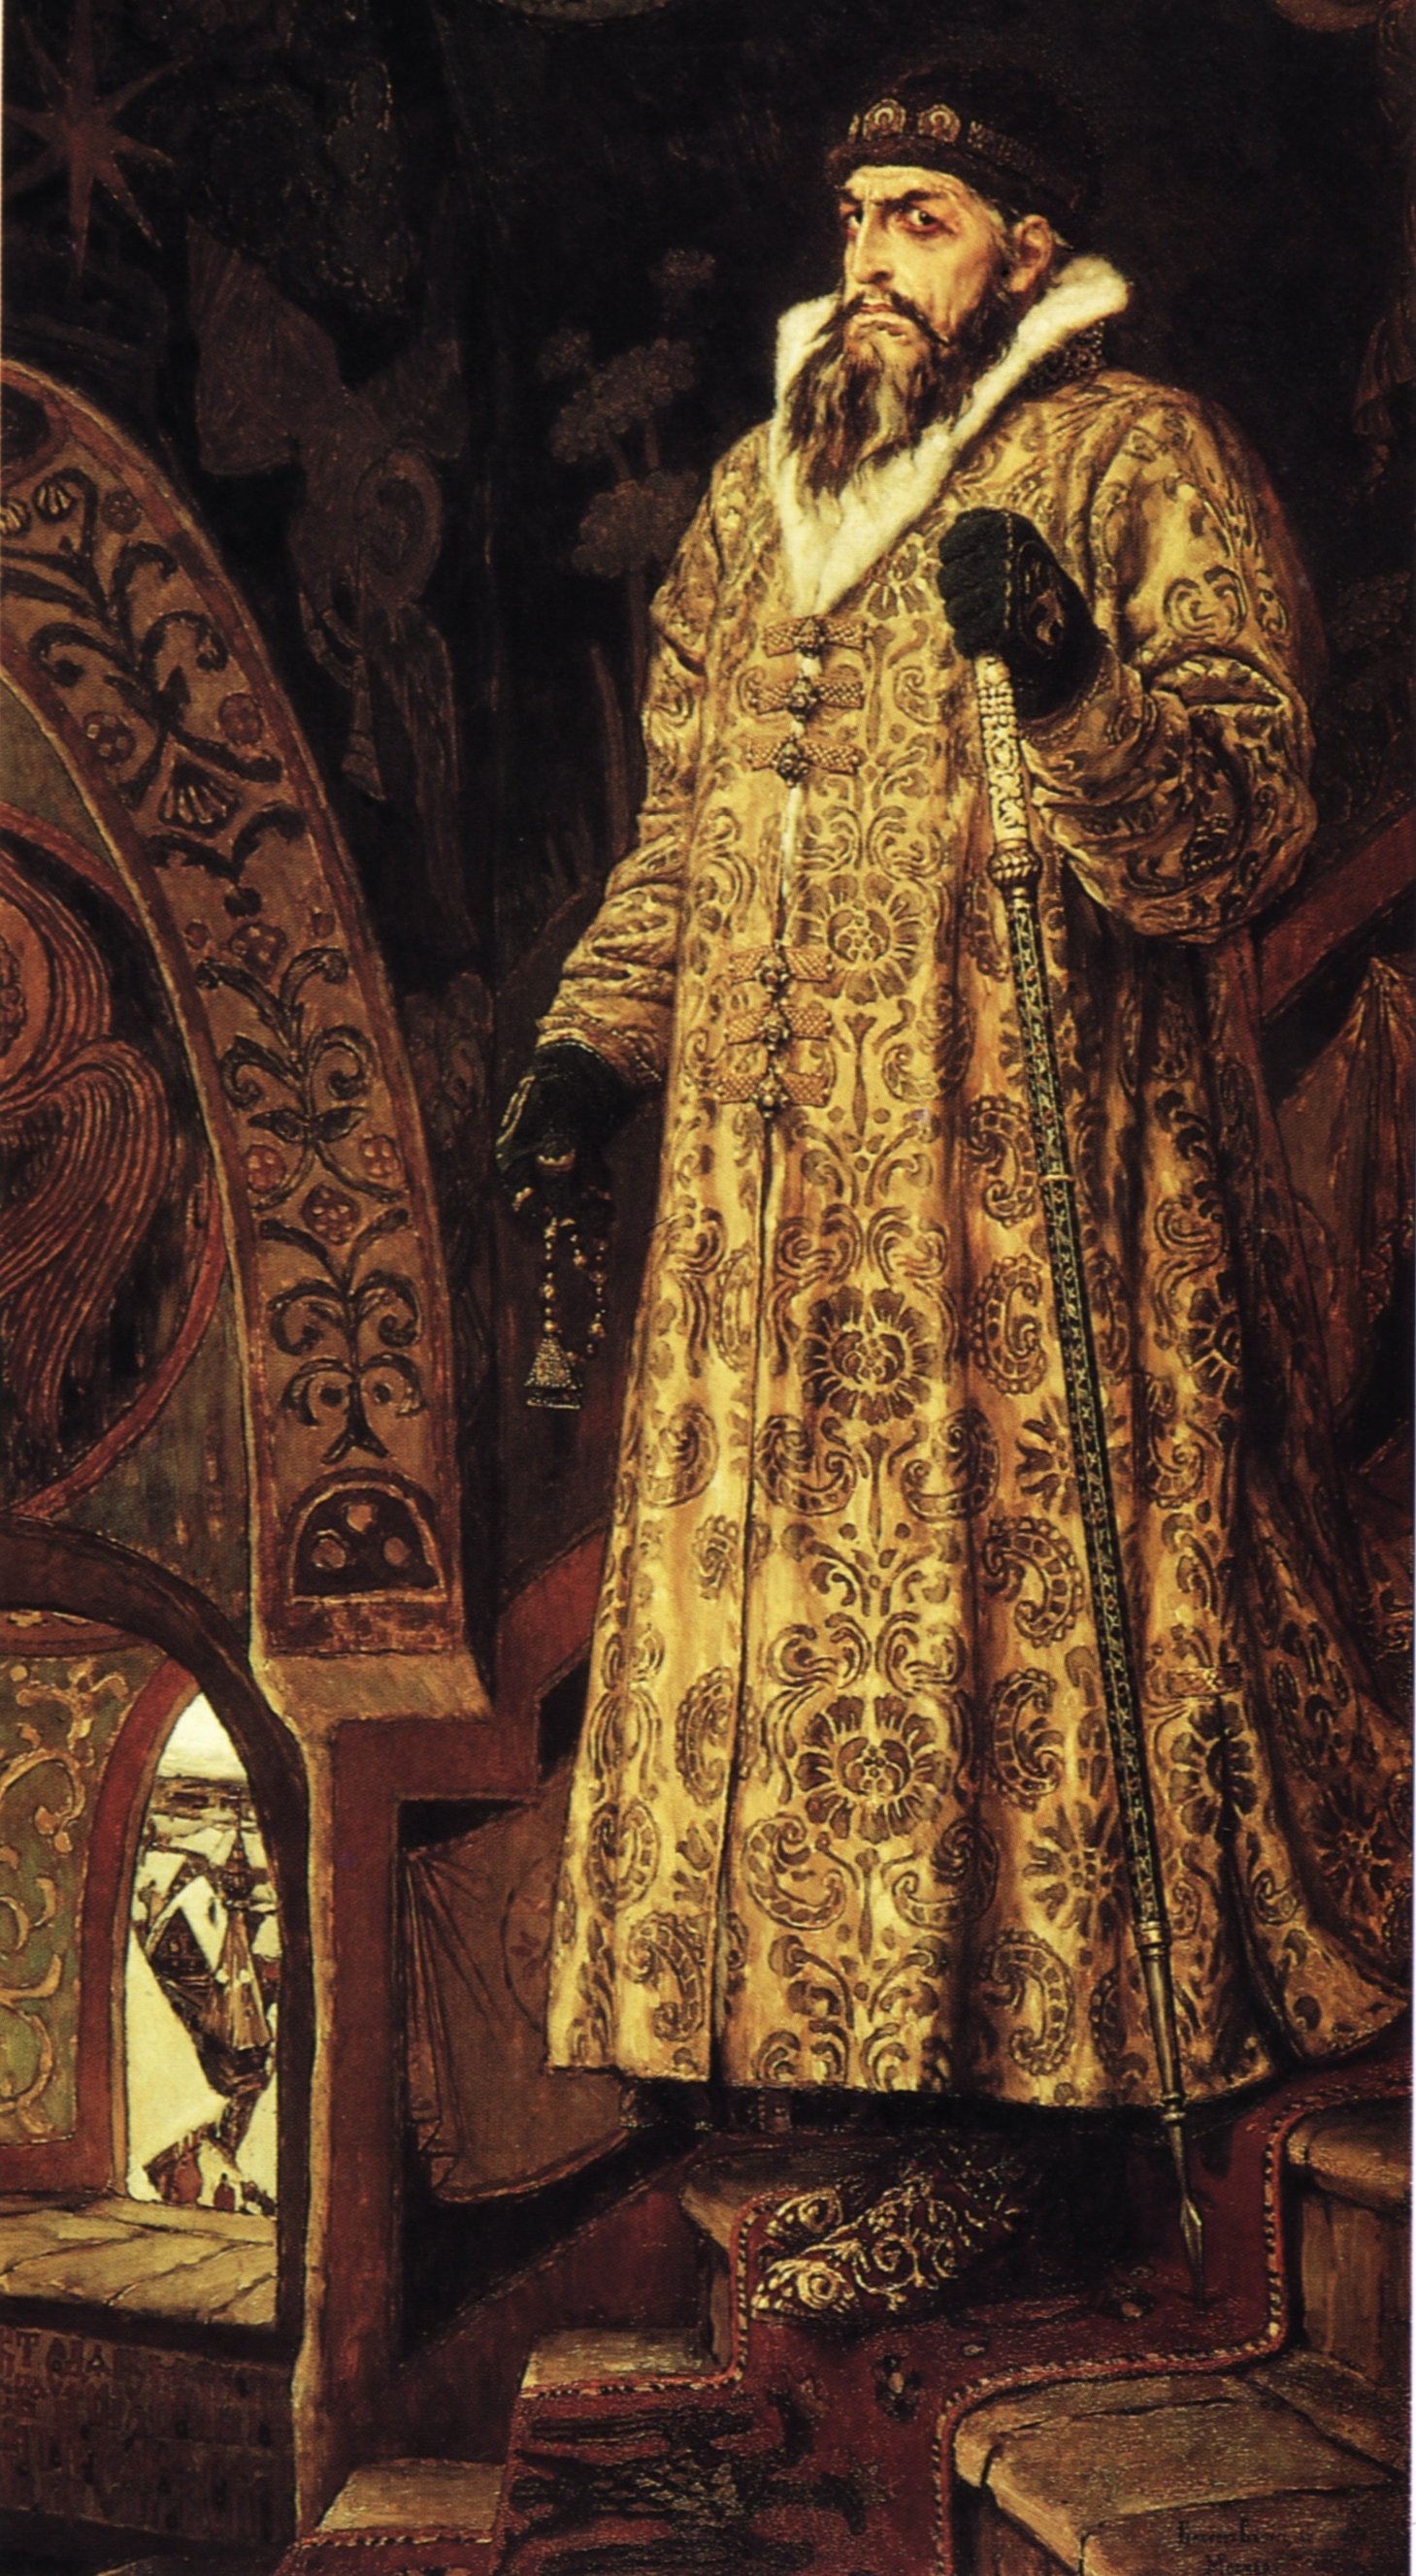 7 facts about Ivan the Terrible, the first Russian tsar - Russia Beyond